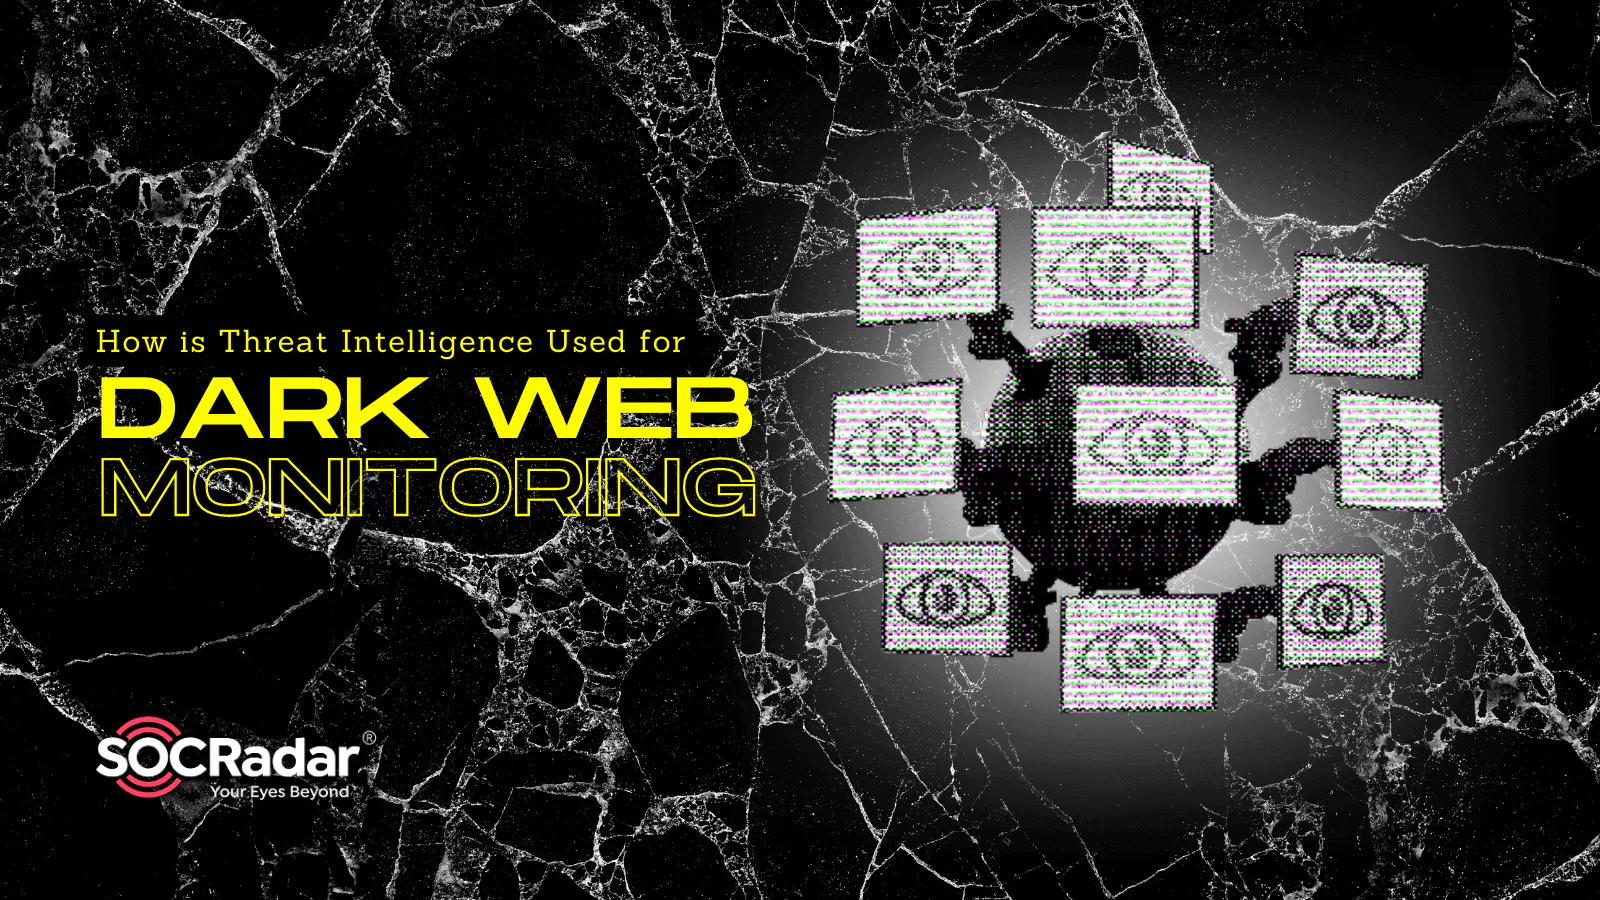 SOCRadar® Cyber Intelligence Inc. | How is Threat Intelligence Used to Monitor Criminal Activity on the Dark Web?